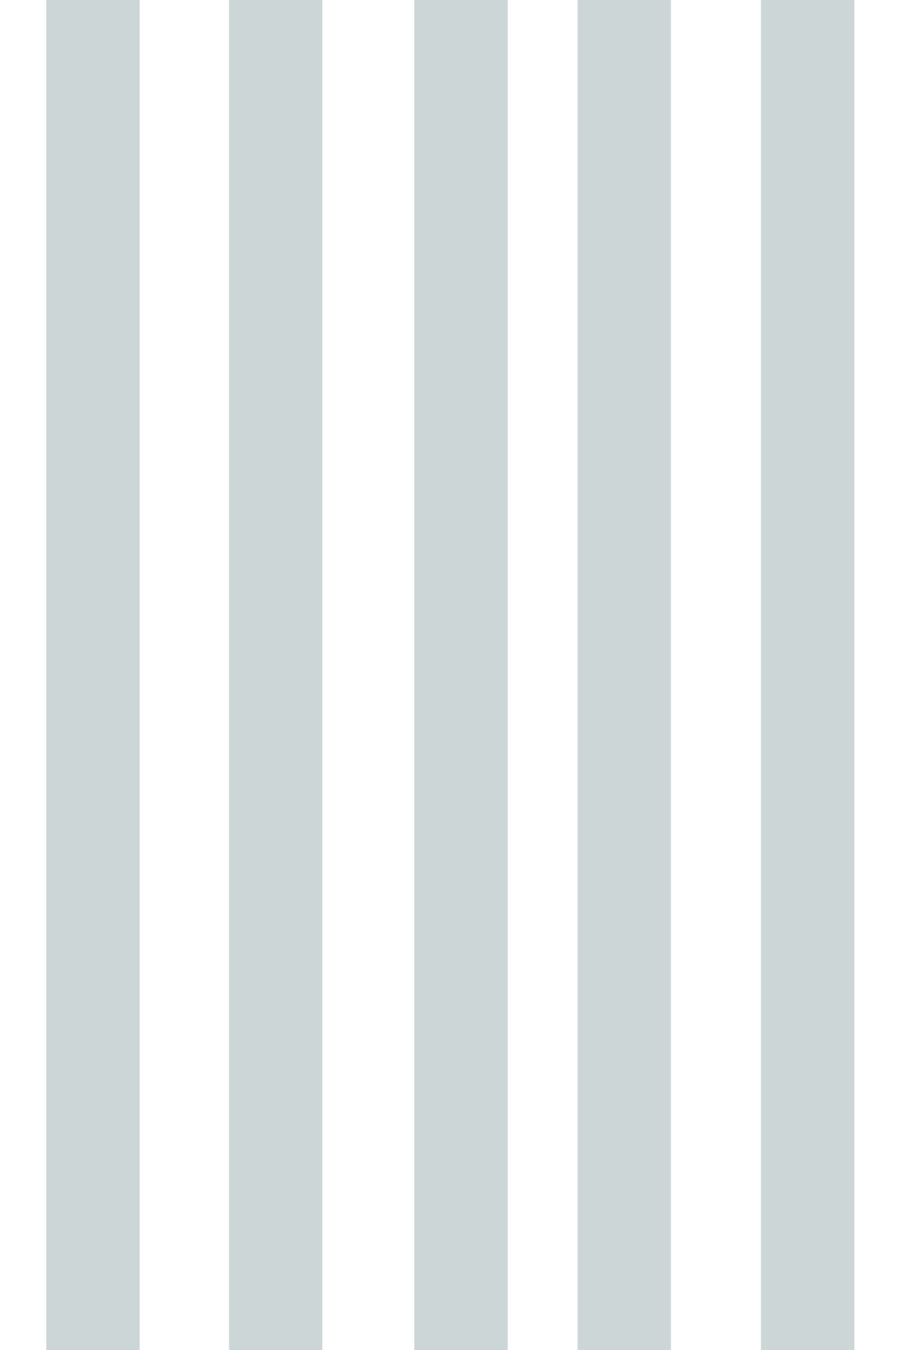 Woolf With Me Fitted Crib Sheet Stripes color_sky